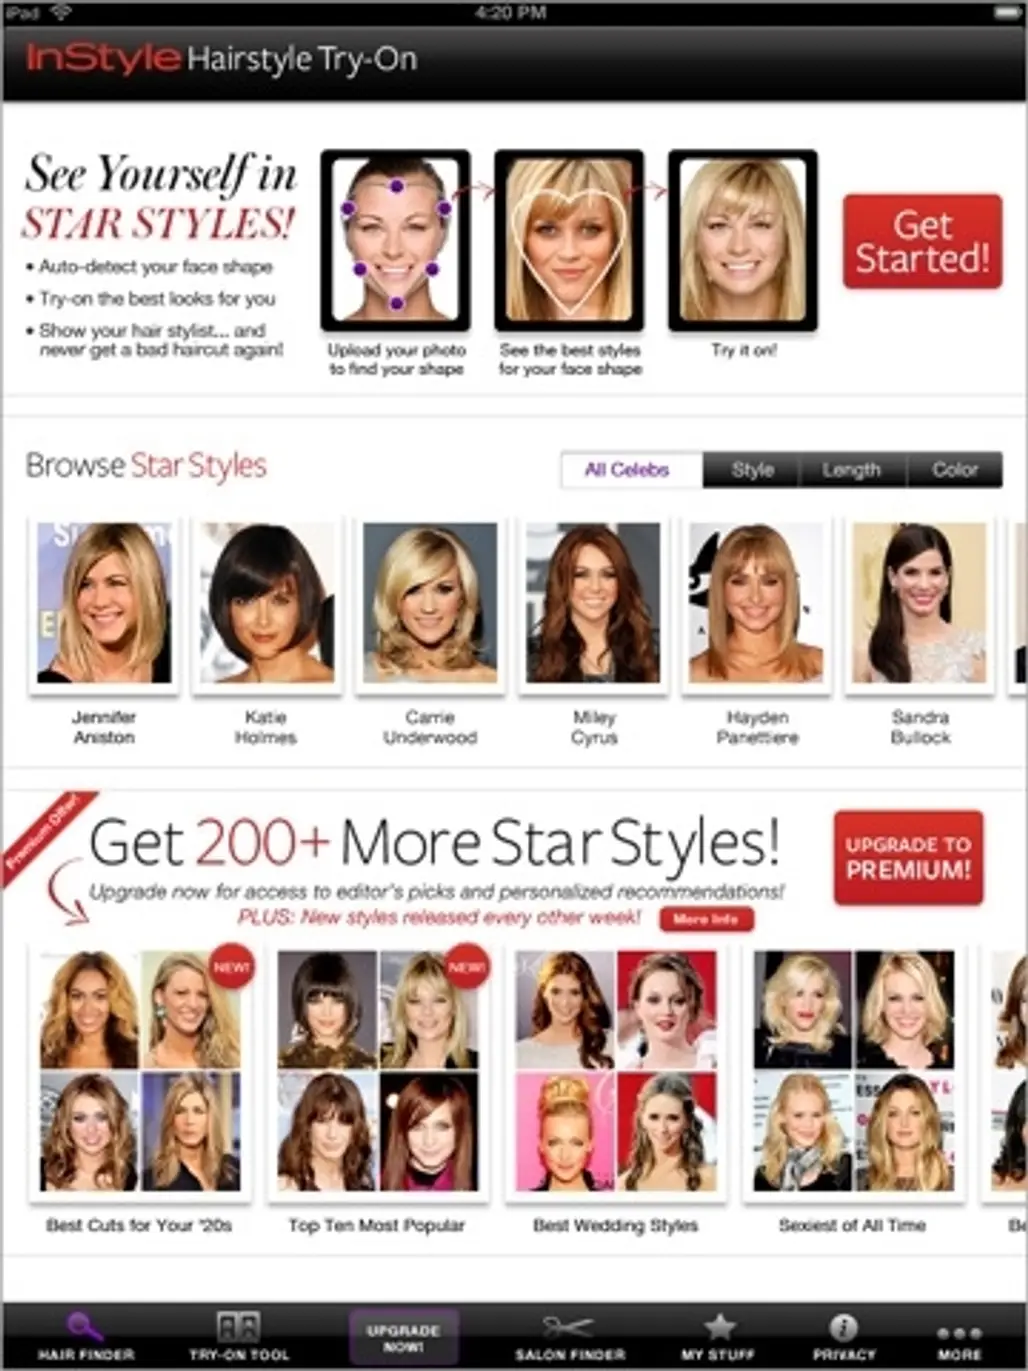 InStyle Hairstyle Try-on